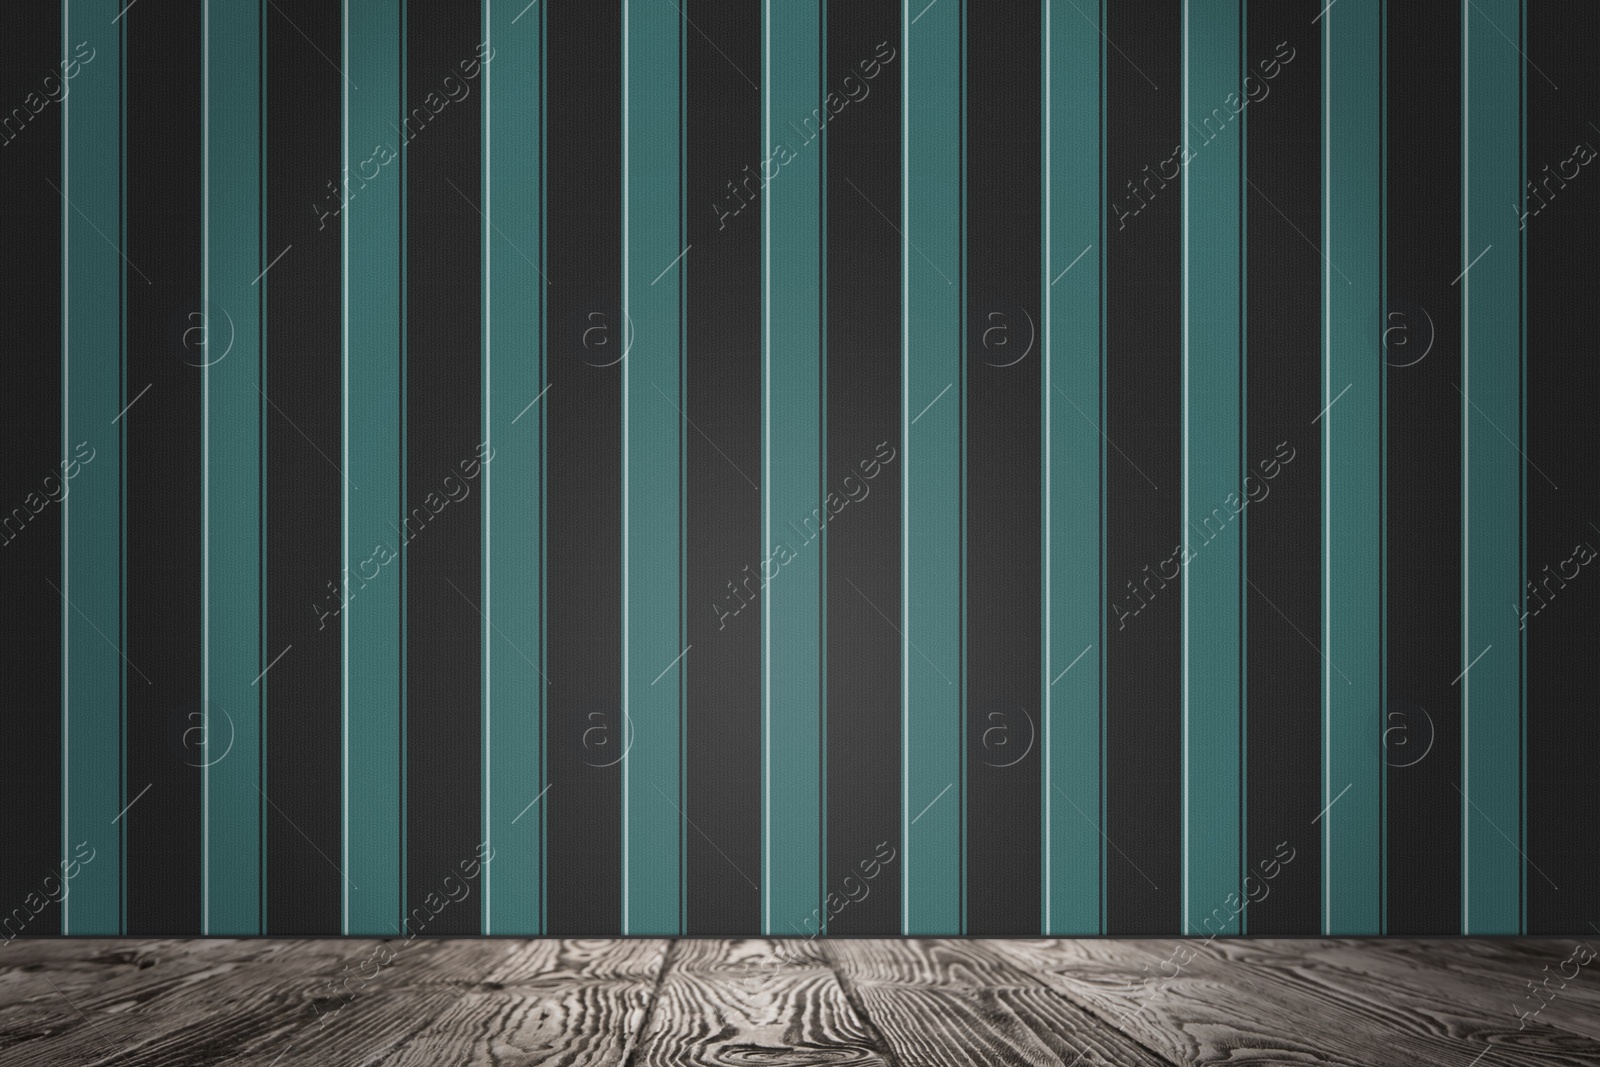 Image of Striped wallpaper and wooden floor in room